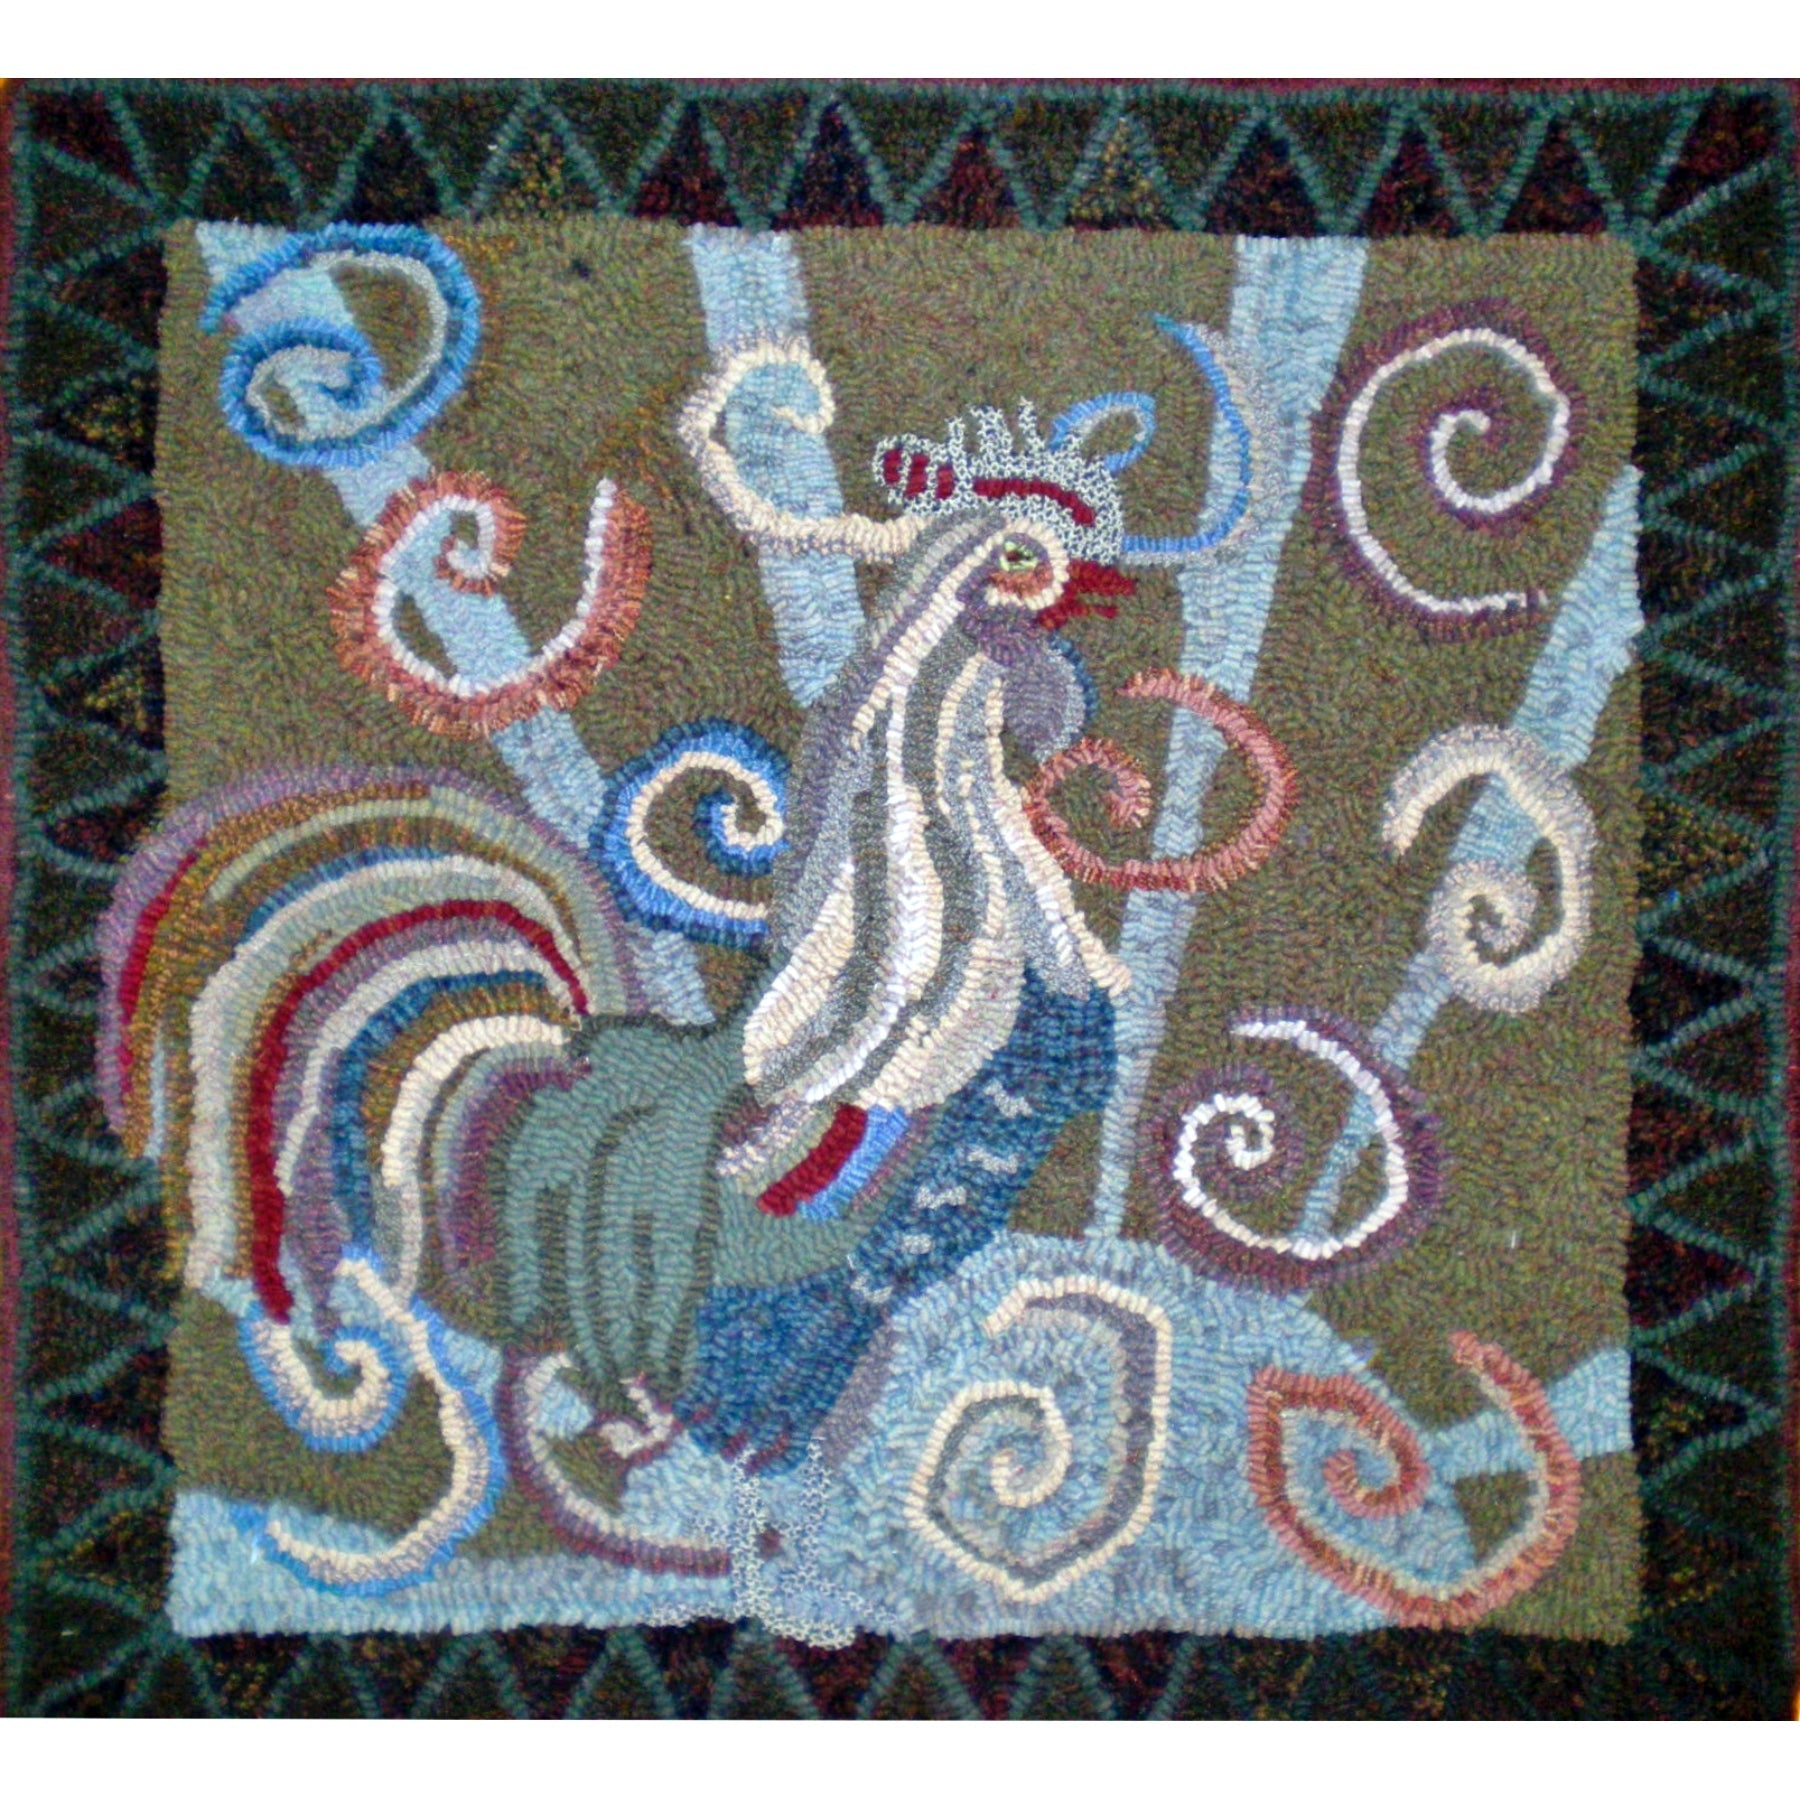 Marti Gras Rooster, rug hooked by Cheryl Bollenbach